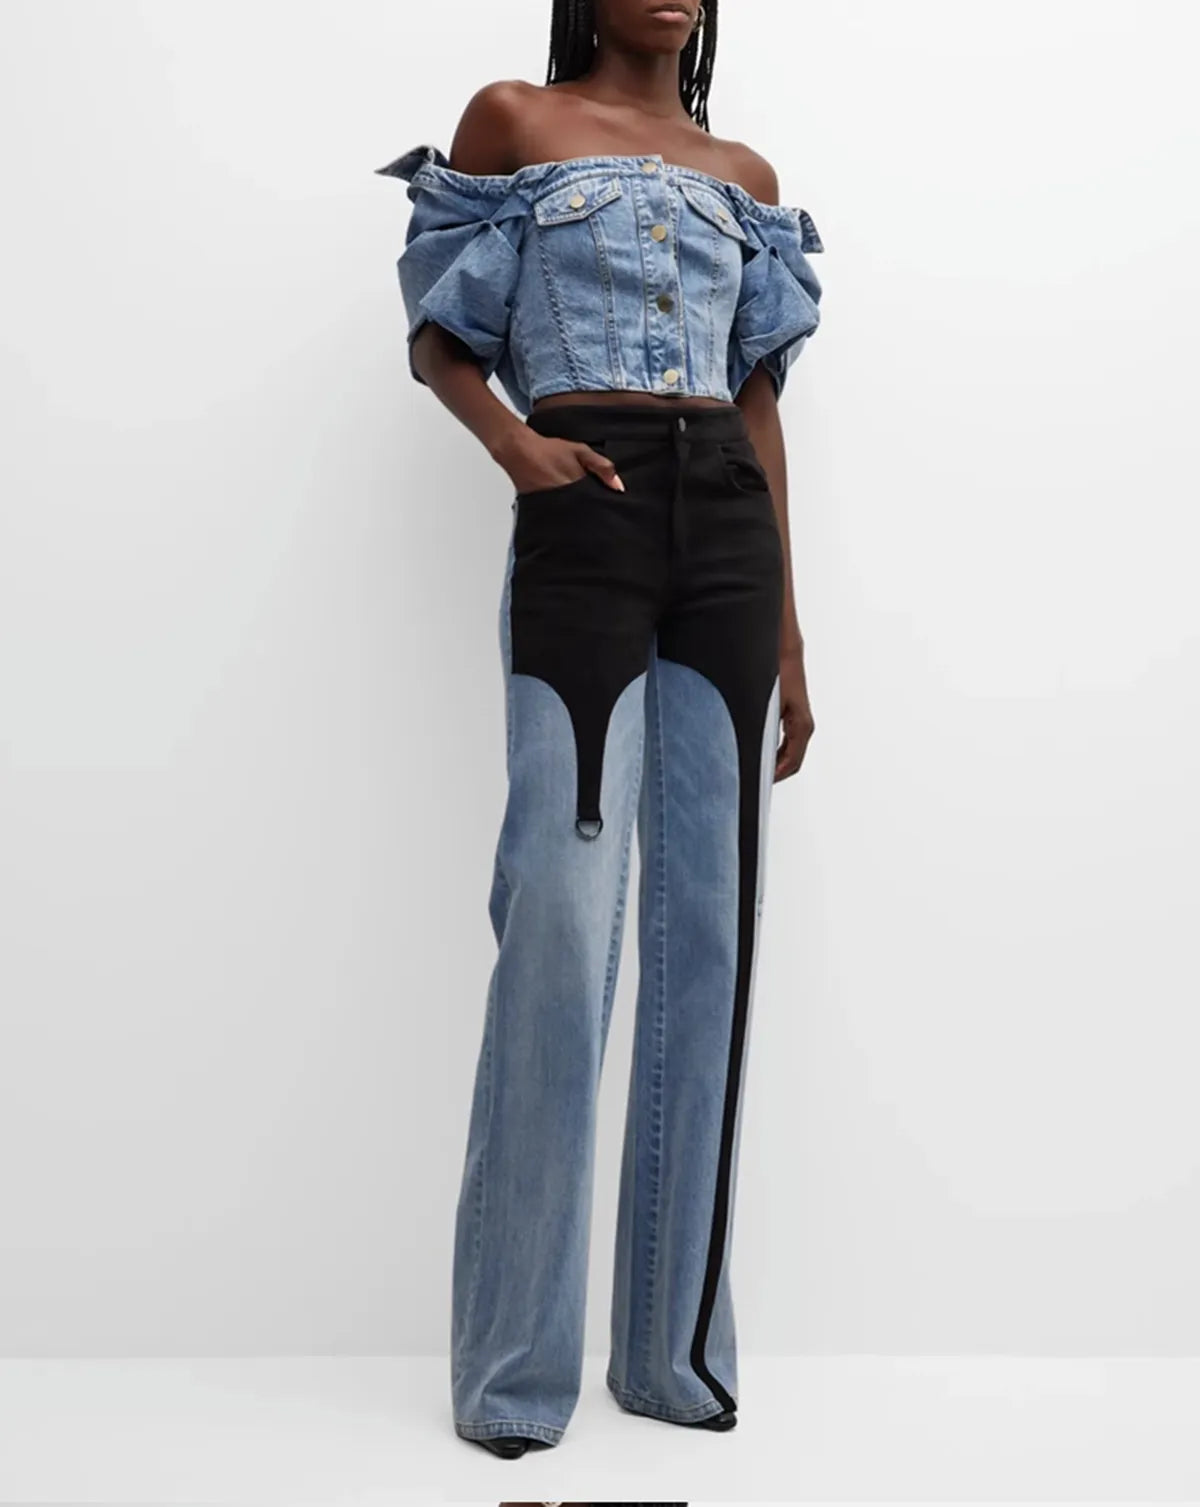 Black and Blue High Waisted Wide Leg Jeans